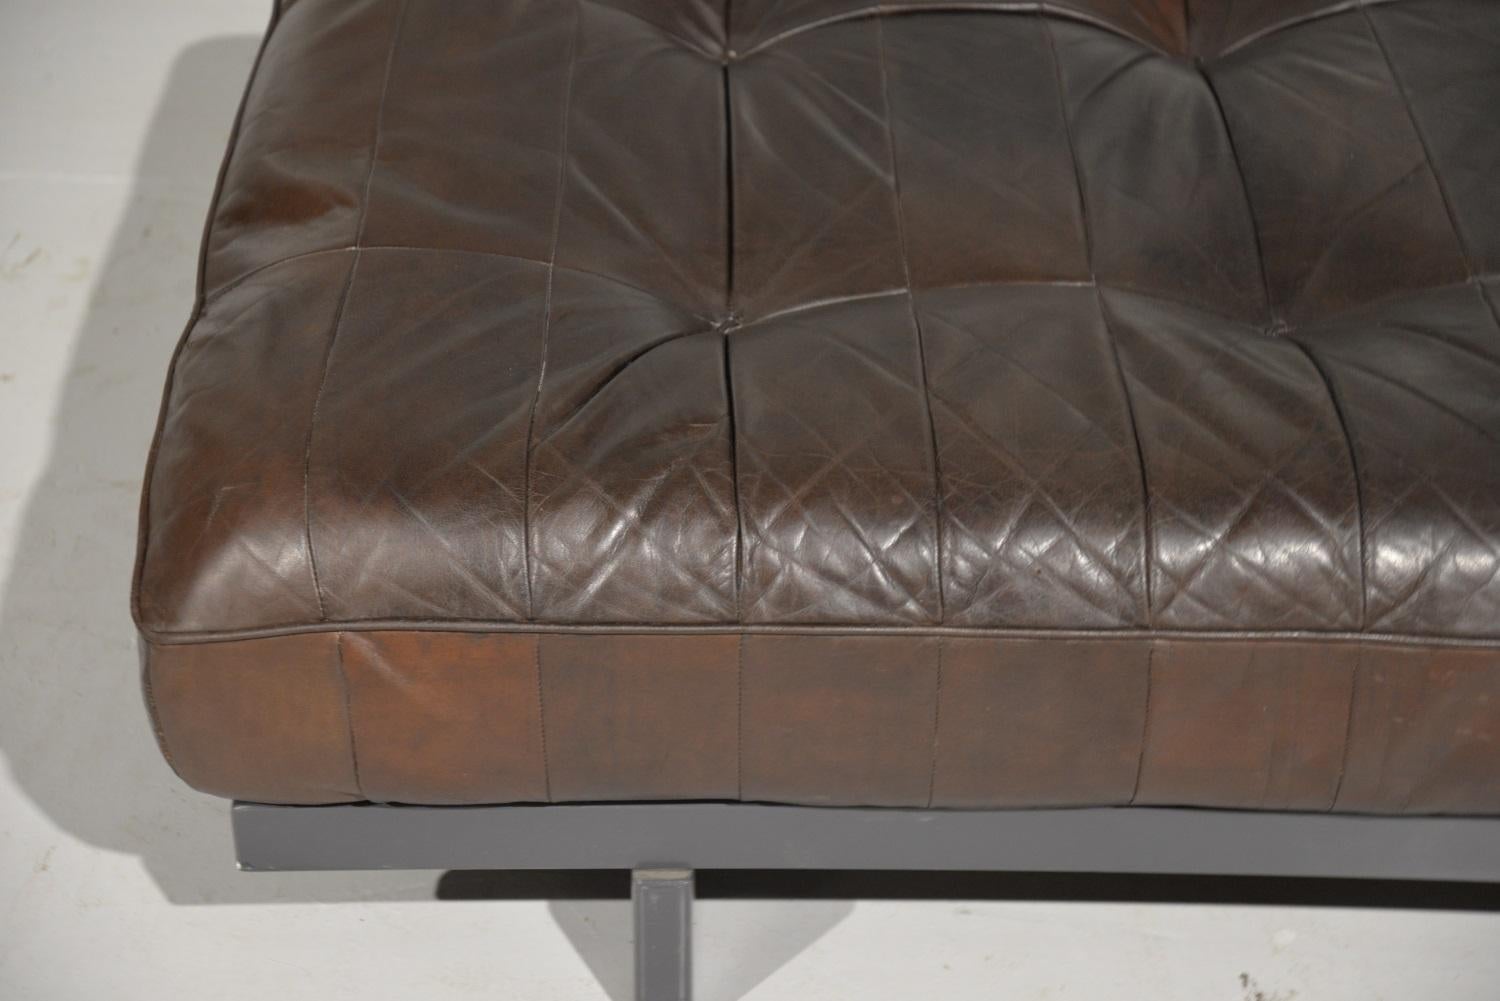 Vintage De Sede DS 80 Patchwork Leather Daybed, Switzerland, 1960s For Sale 4